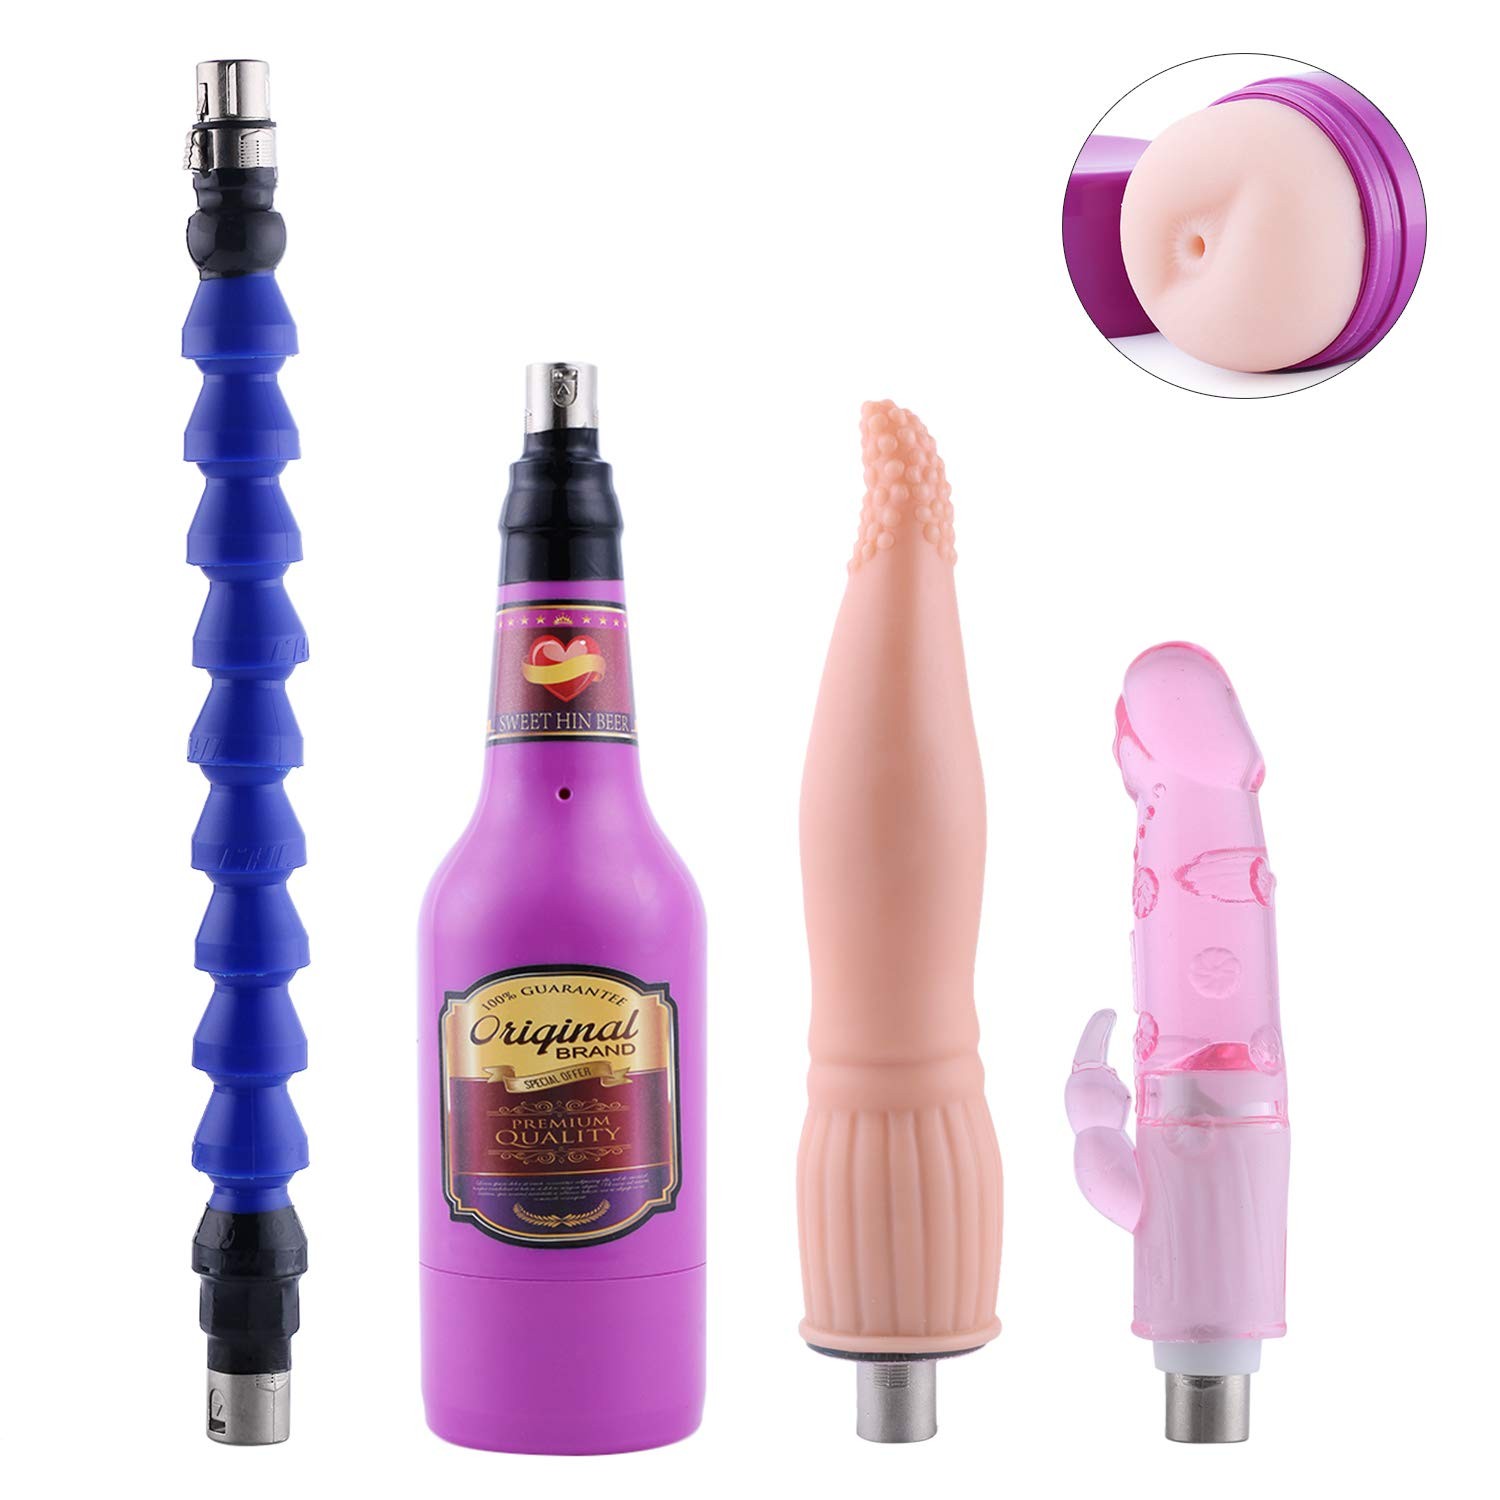 Thrusting Sex Machine Accessories for Couples